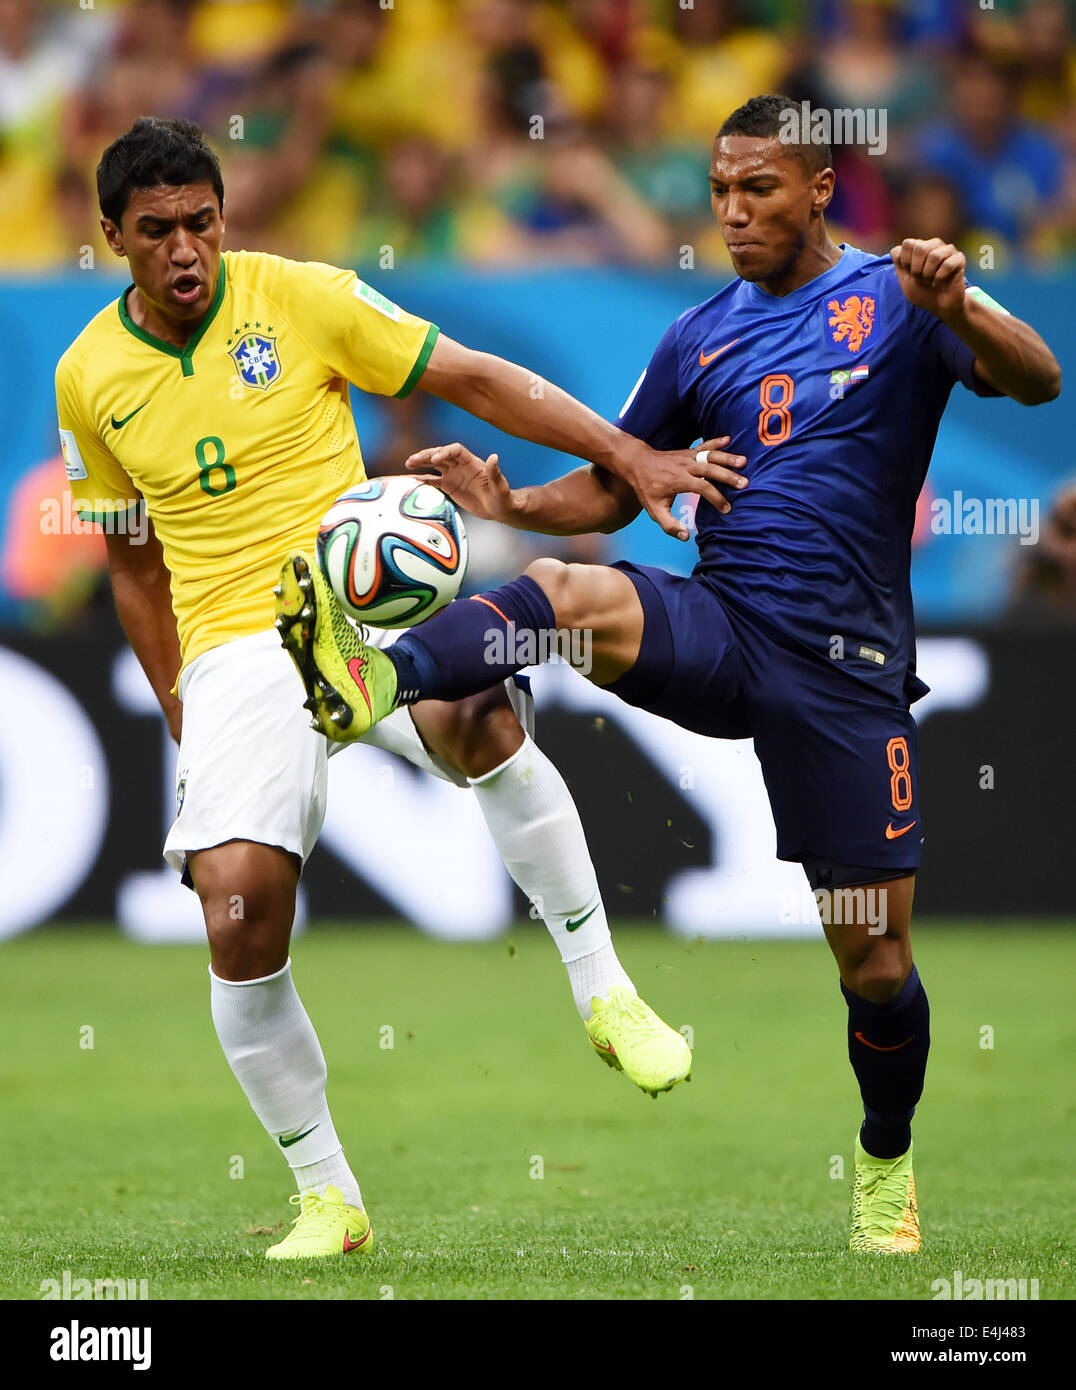 Brasilia, Brazil. 12th July, 2014. Netherlands' Jonathan De Guzman (R) vies with Brazil's Paulinho during the third place play-off match between Brazil and Netherlands of 2014 FIFA World Cup at the Estadio Nacional Stadium in Brasilia, Brazil, on July 12, 2014. Credit:  Guo Yong/Xinhua/Alamy Live News Stock Photo